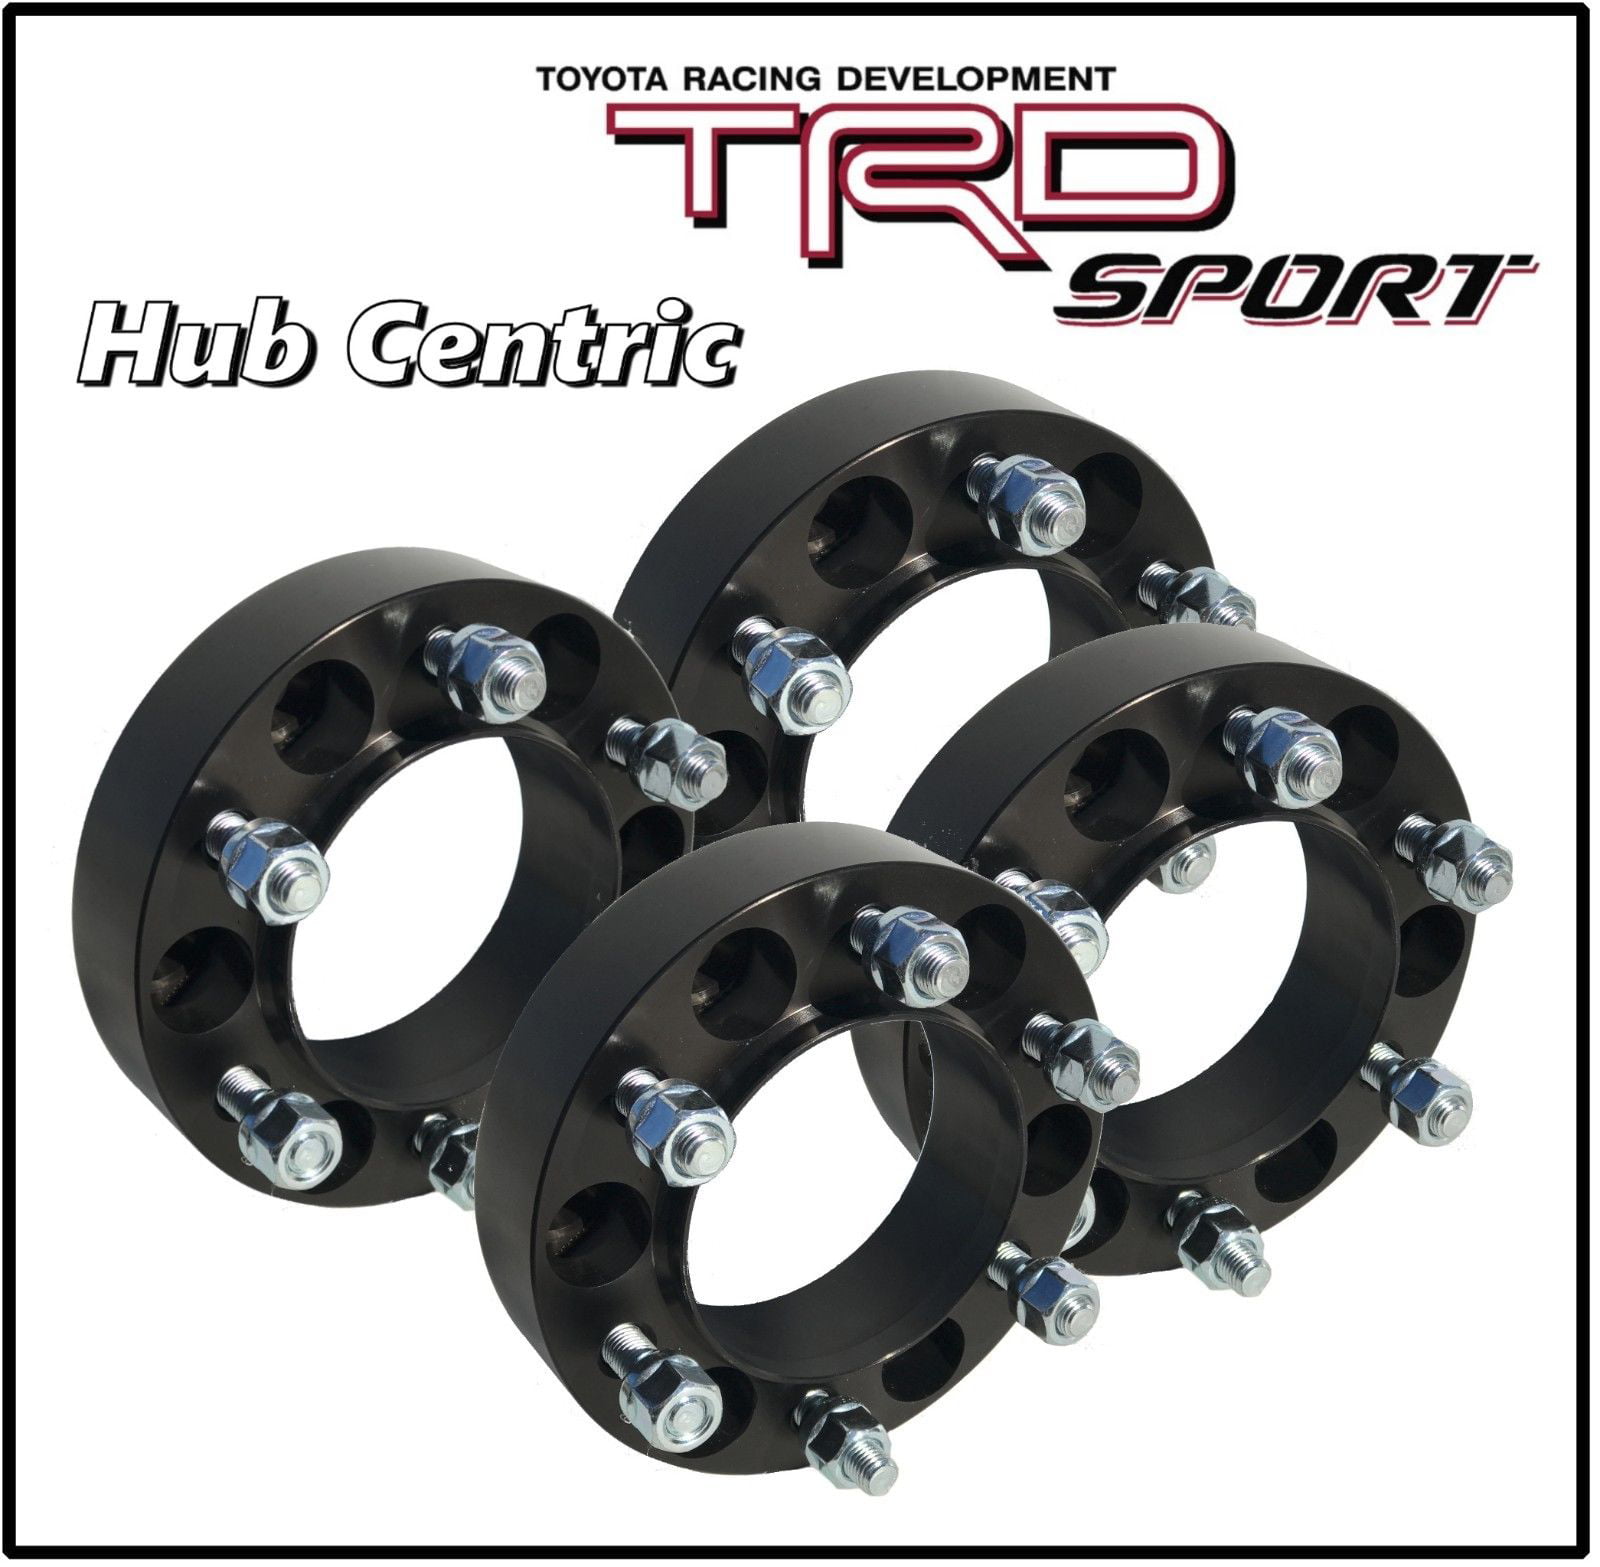 Works with Tacoma Tundra 4 Runner FJ Cruiser 2 Pc 3 Thick Black Hub Centric Wheel Spacers Adapters 75mm 